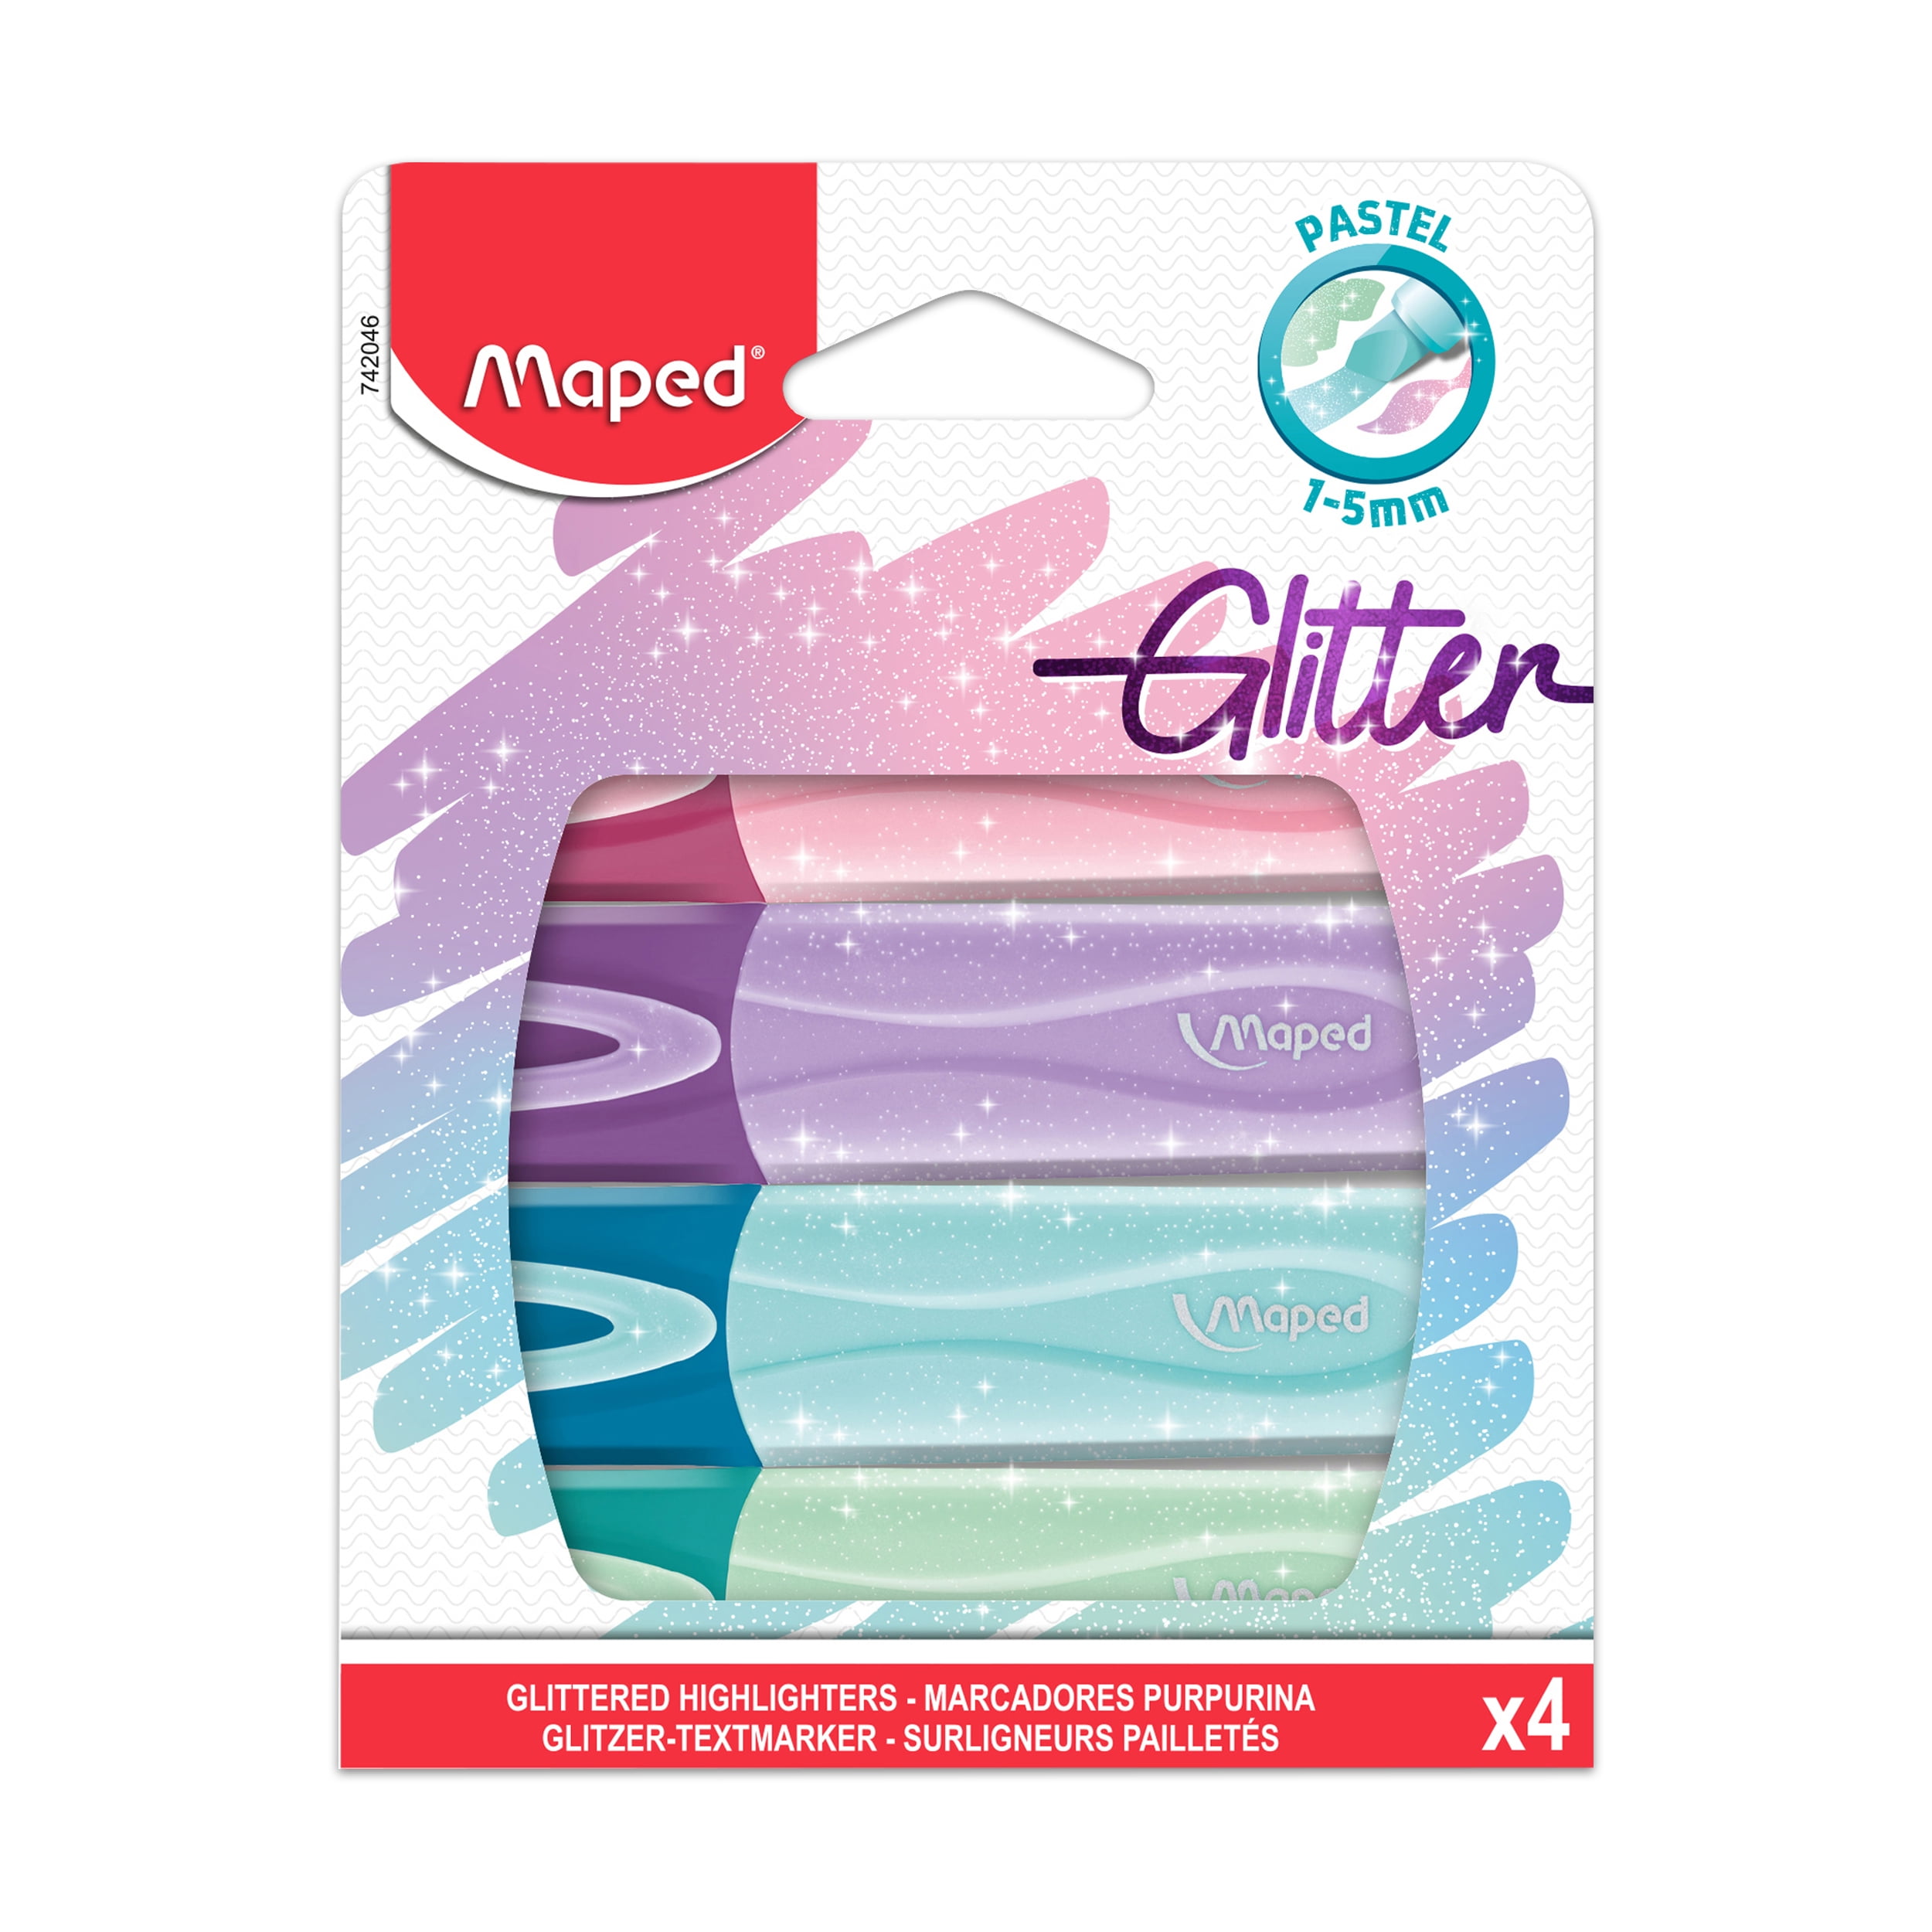 Maped Fluo Peps Glitter Highlighters in Pastel Colors - 4 Pack, Multicolor  